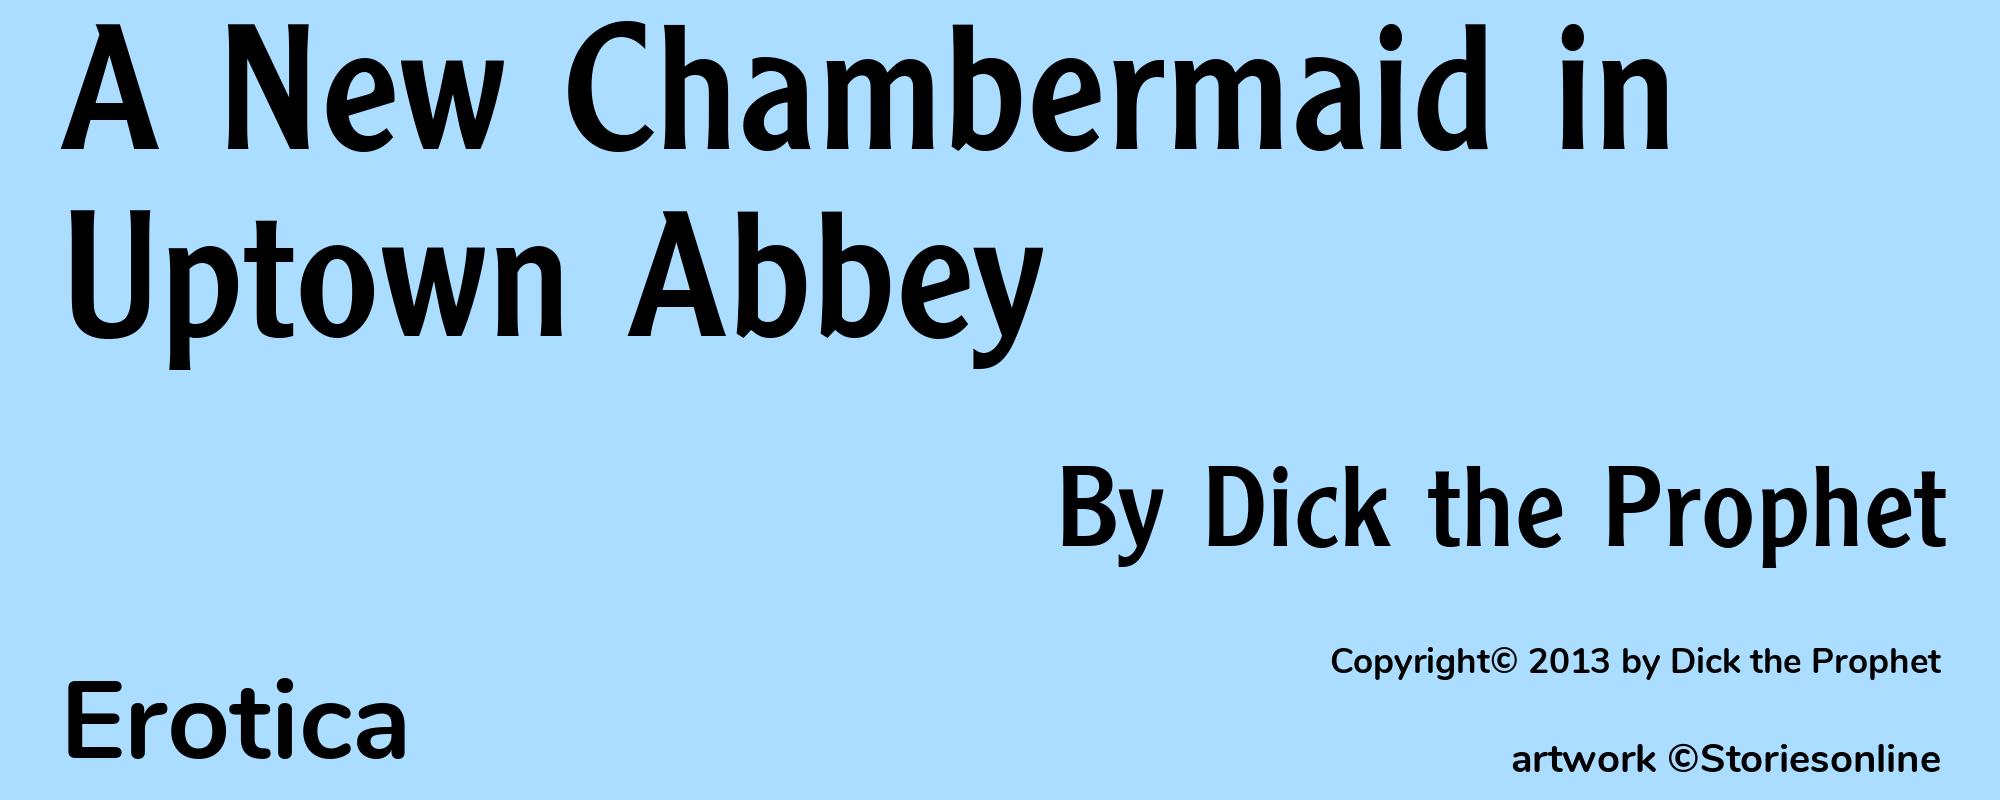 A New Chambermaid in Uptown Abbey - Cover